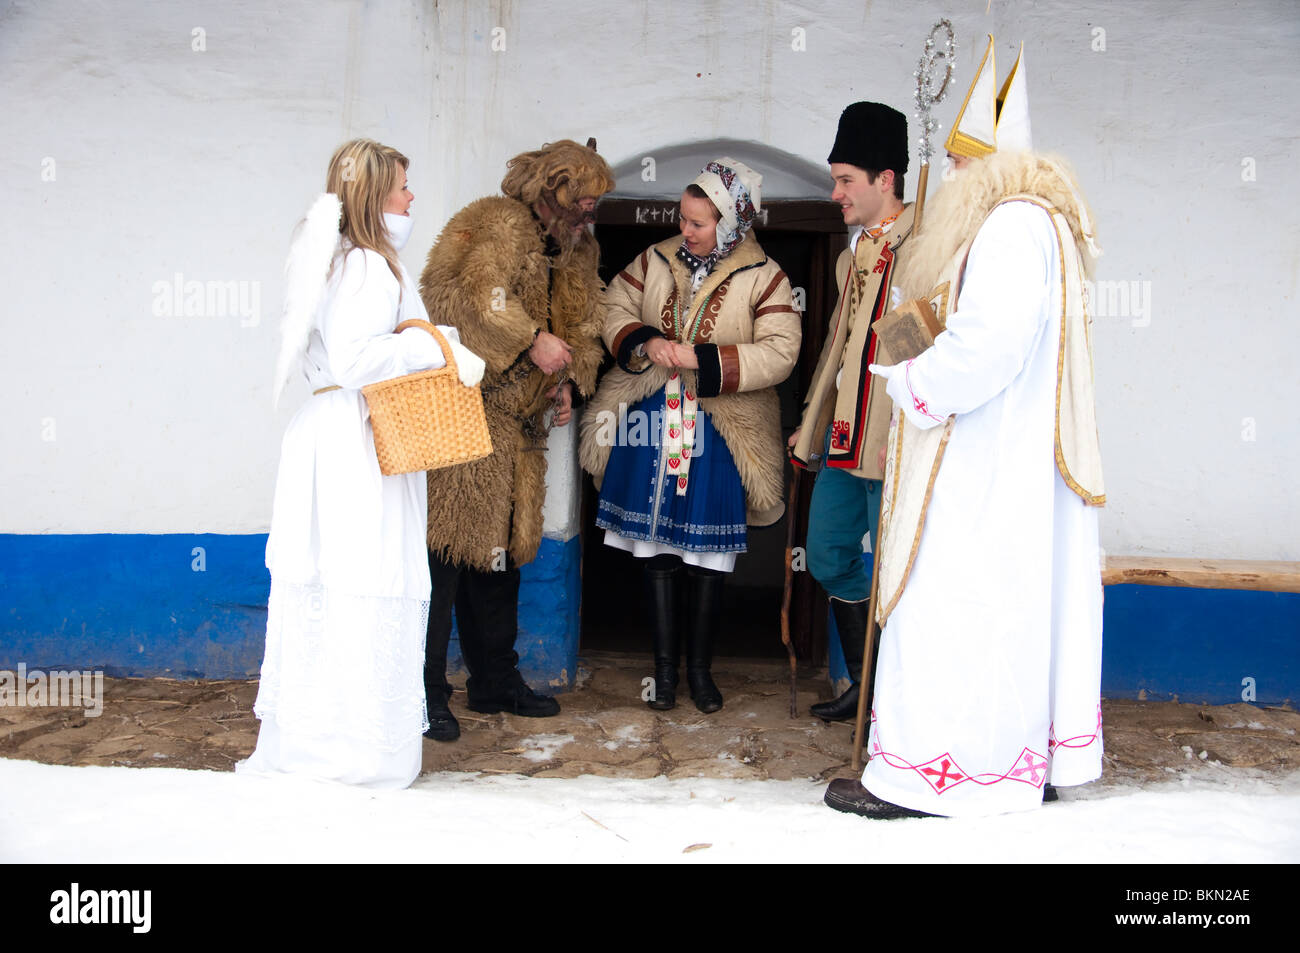 Saint Miculas, angel and devil are visiting rural house and people in folk costume about Christmas Stock Photo